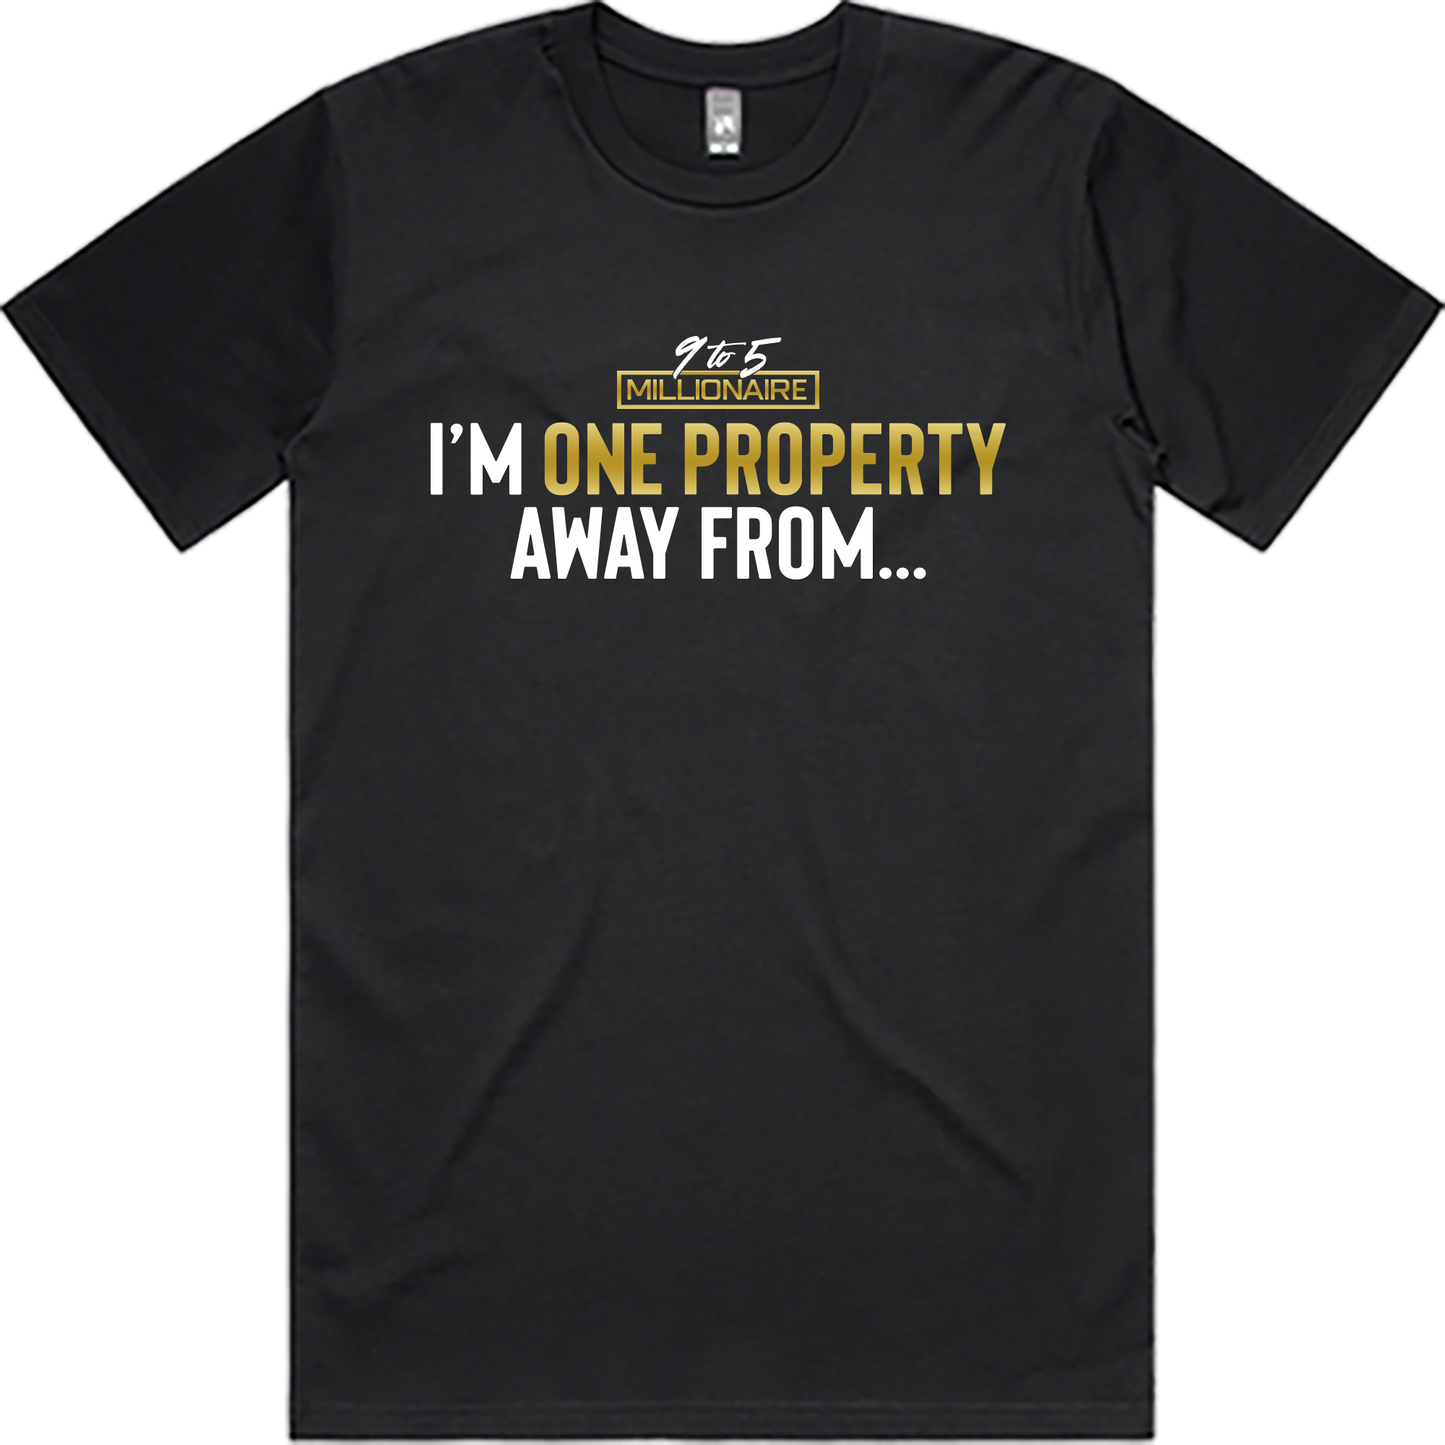 Im One Property Away From-Tee